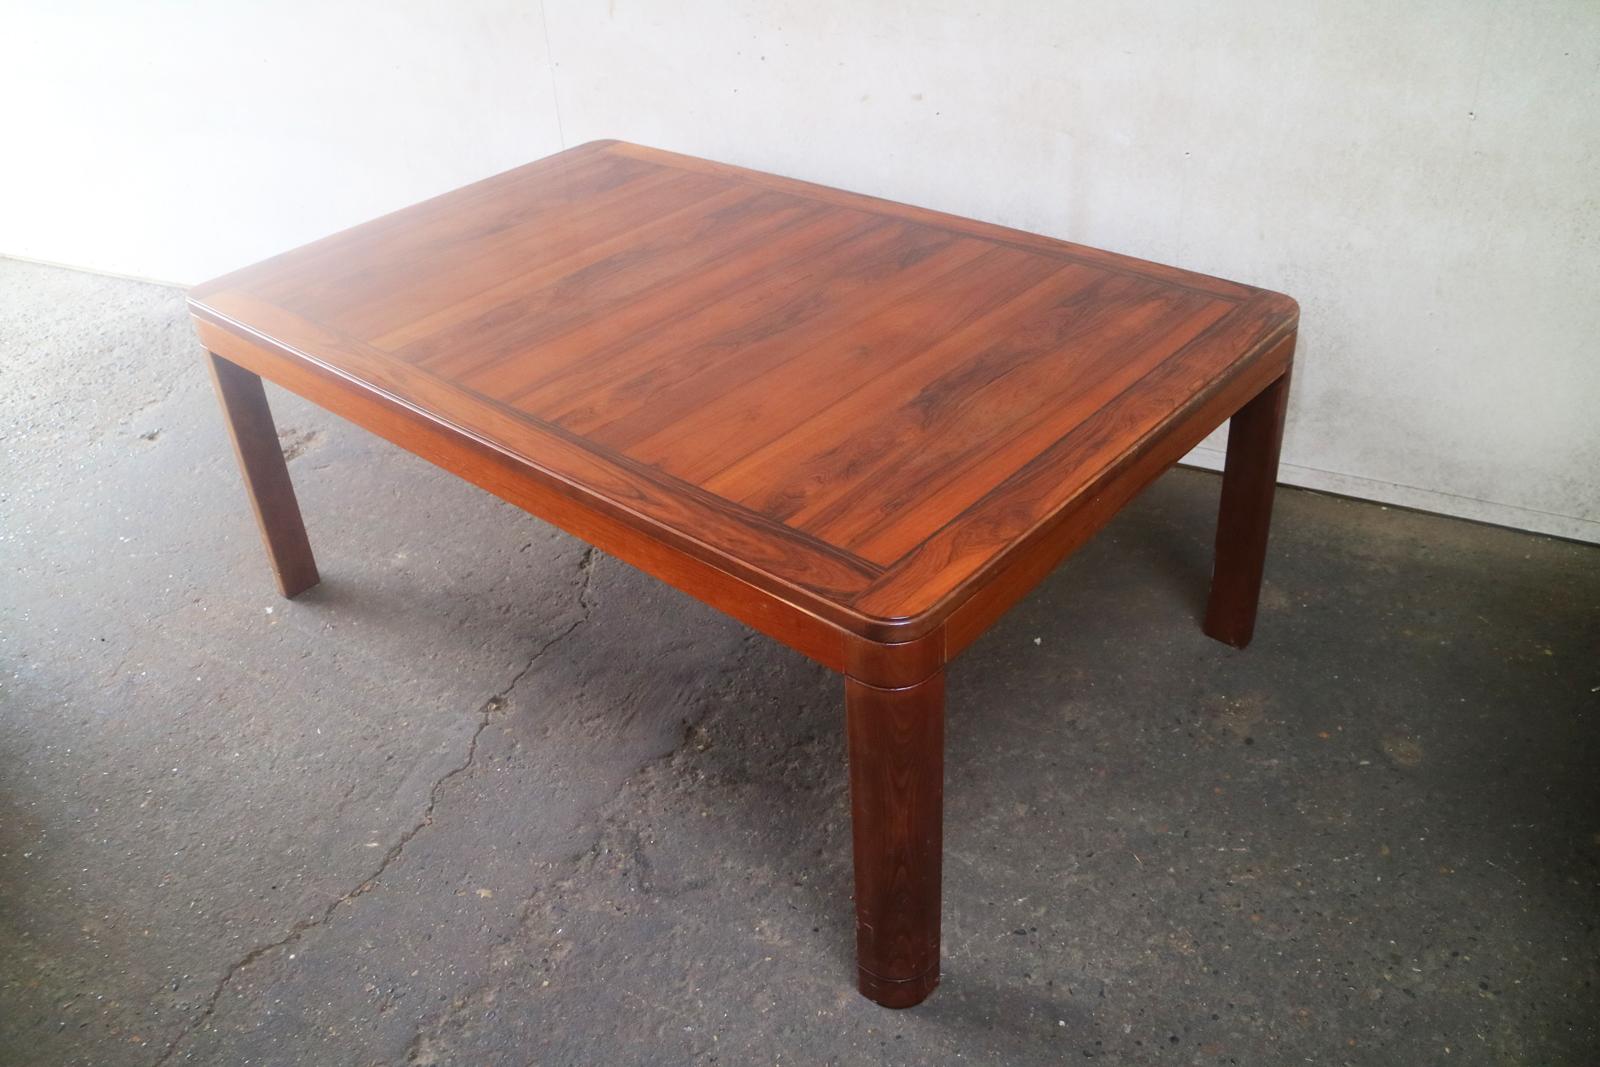 This is an unusually large Danish coffee table with a stunning rosewood veneered rounded corner top with an inlaid border. Sits on solid teak legs.


Country of origin: Denmark
Date of manufacture: 1970s 
Material: Rosewood veneer and